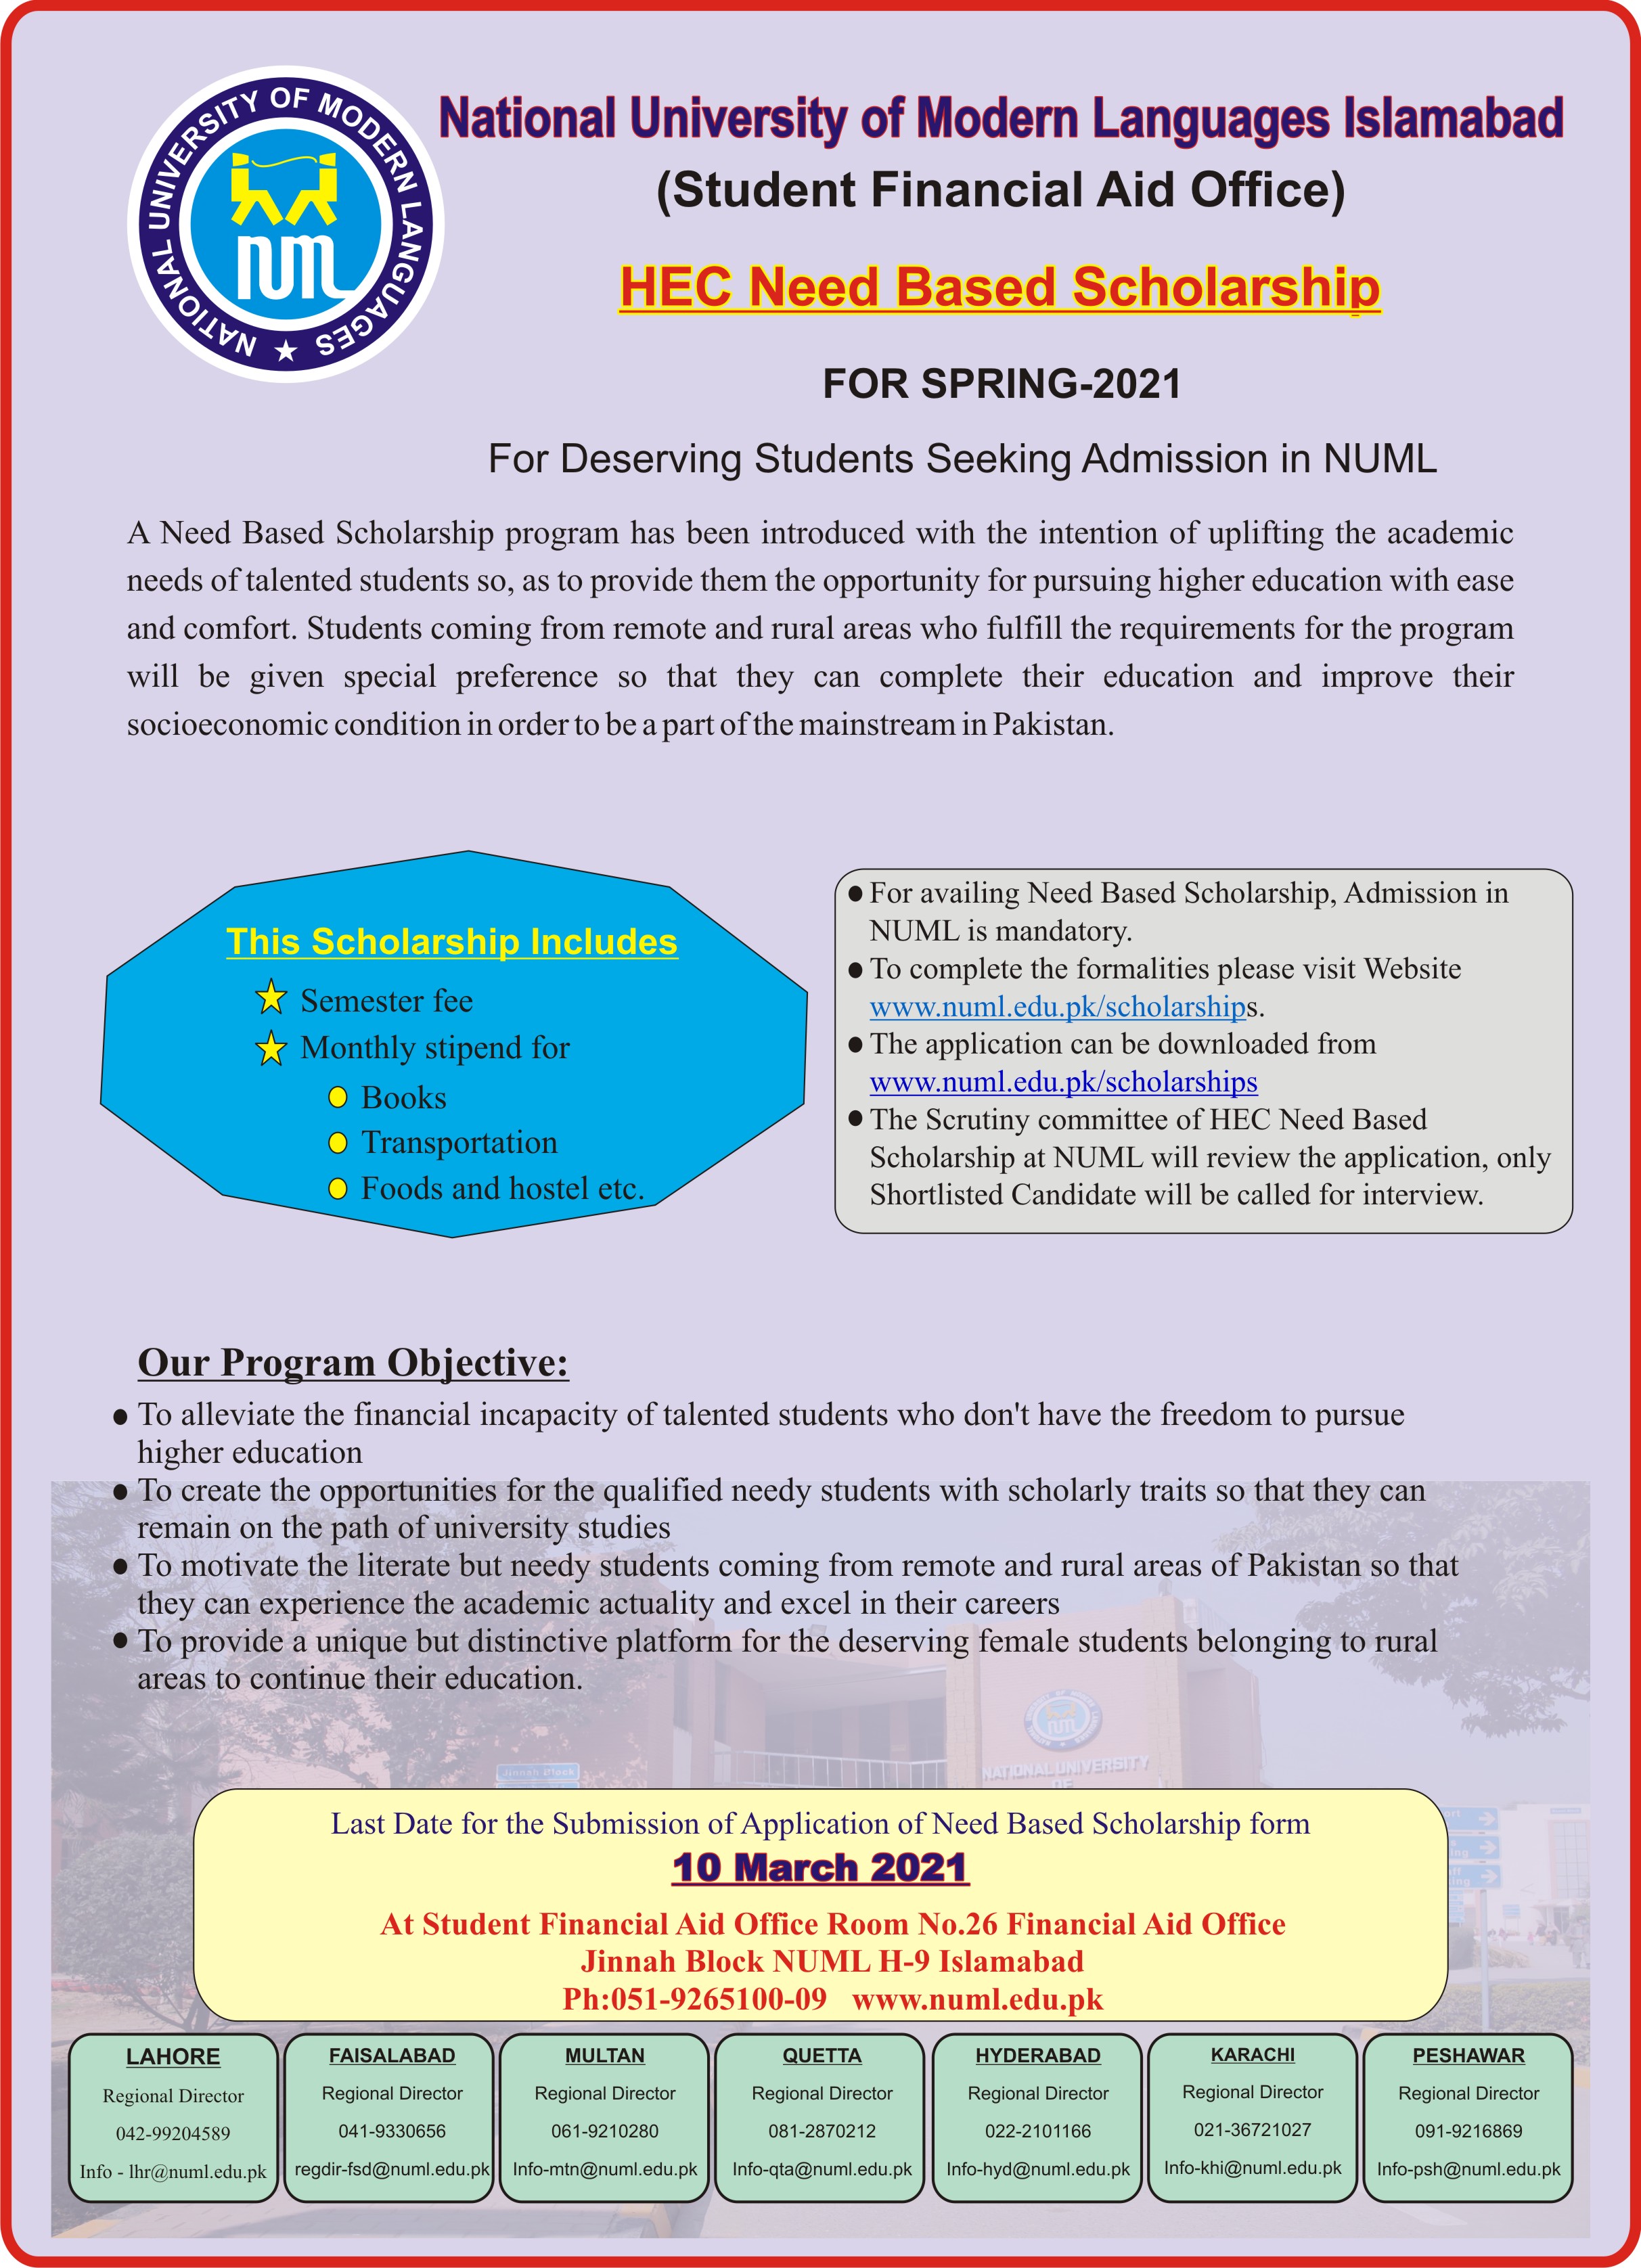 HEC Need Based Scholarship for the Semester Spring 2021